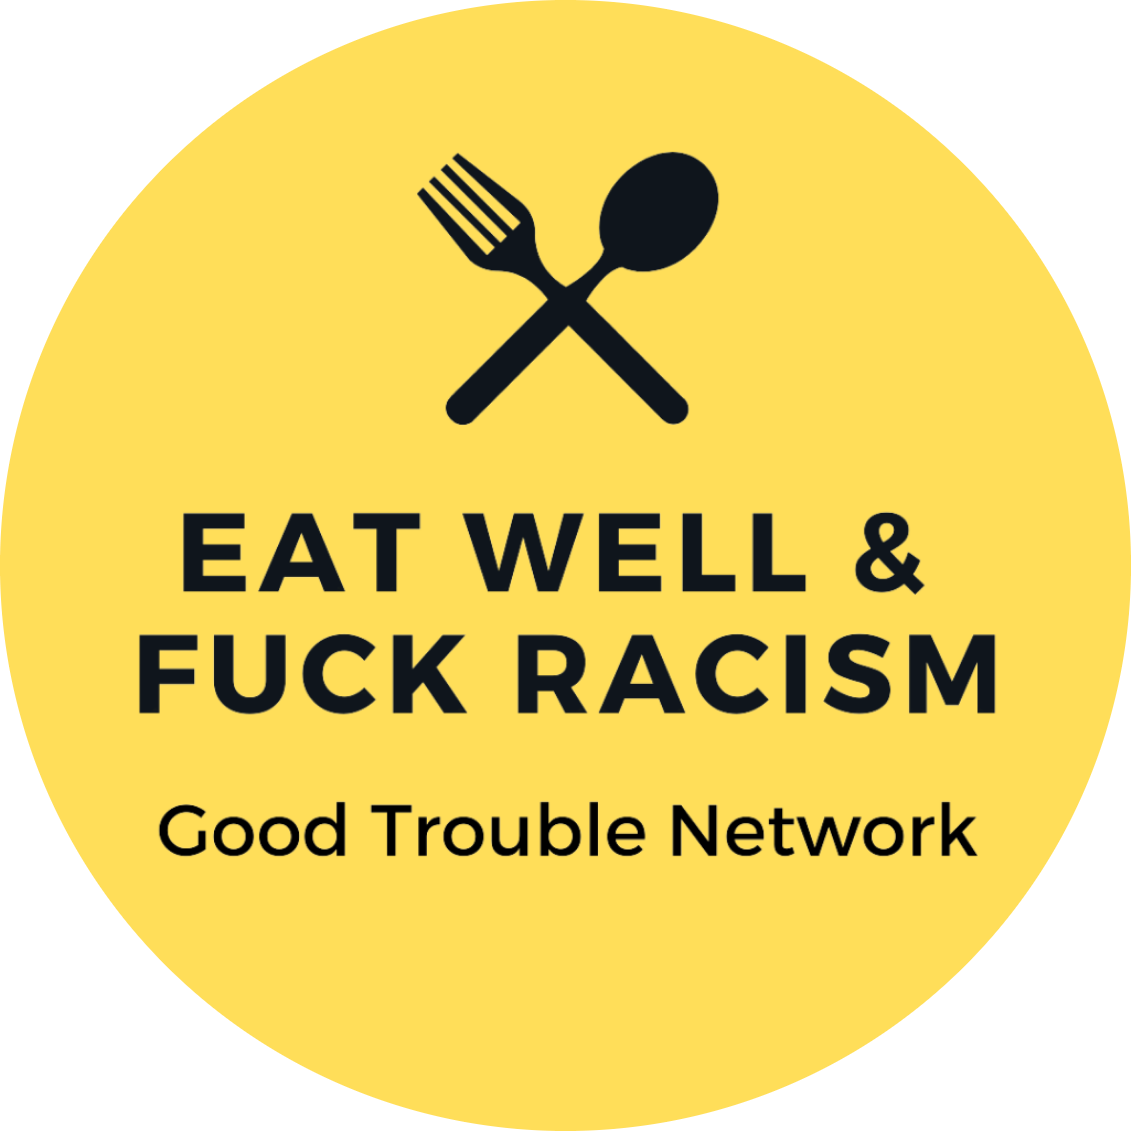 Good Trouble Network